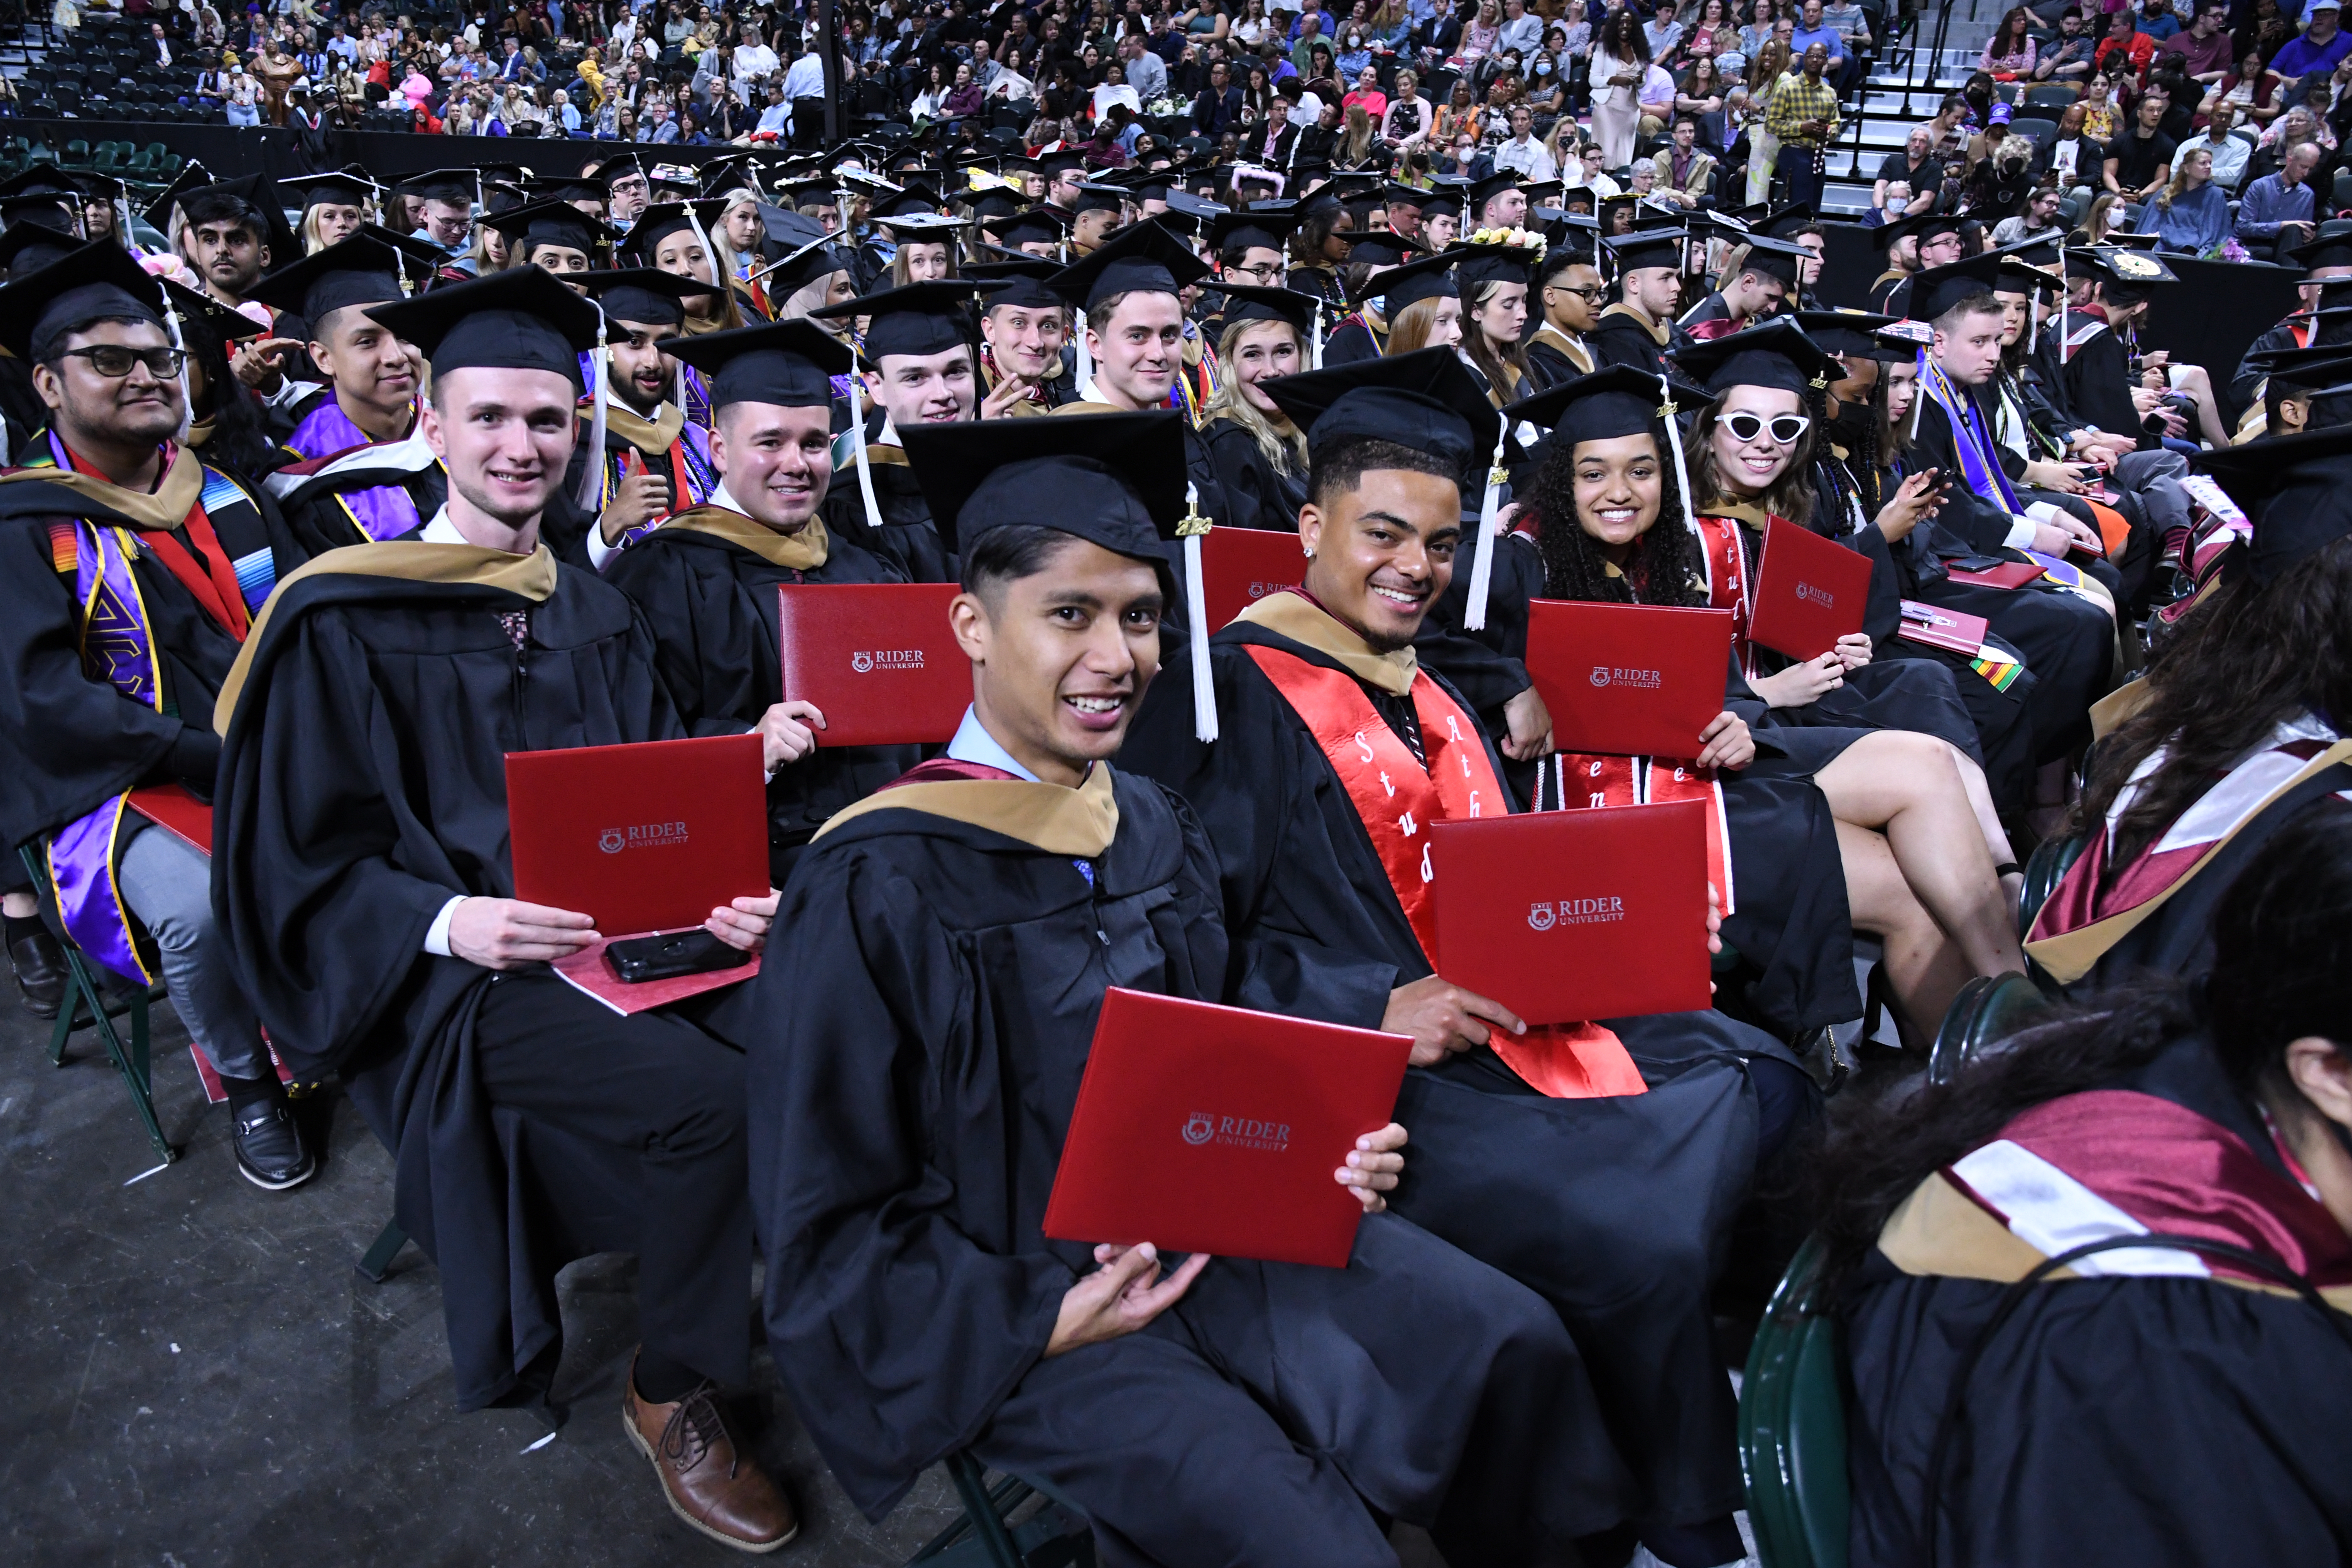 Graduates seated during commencement ceremony